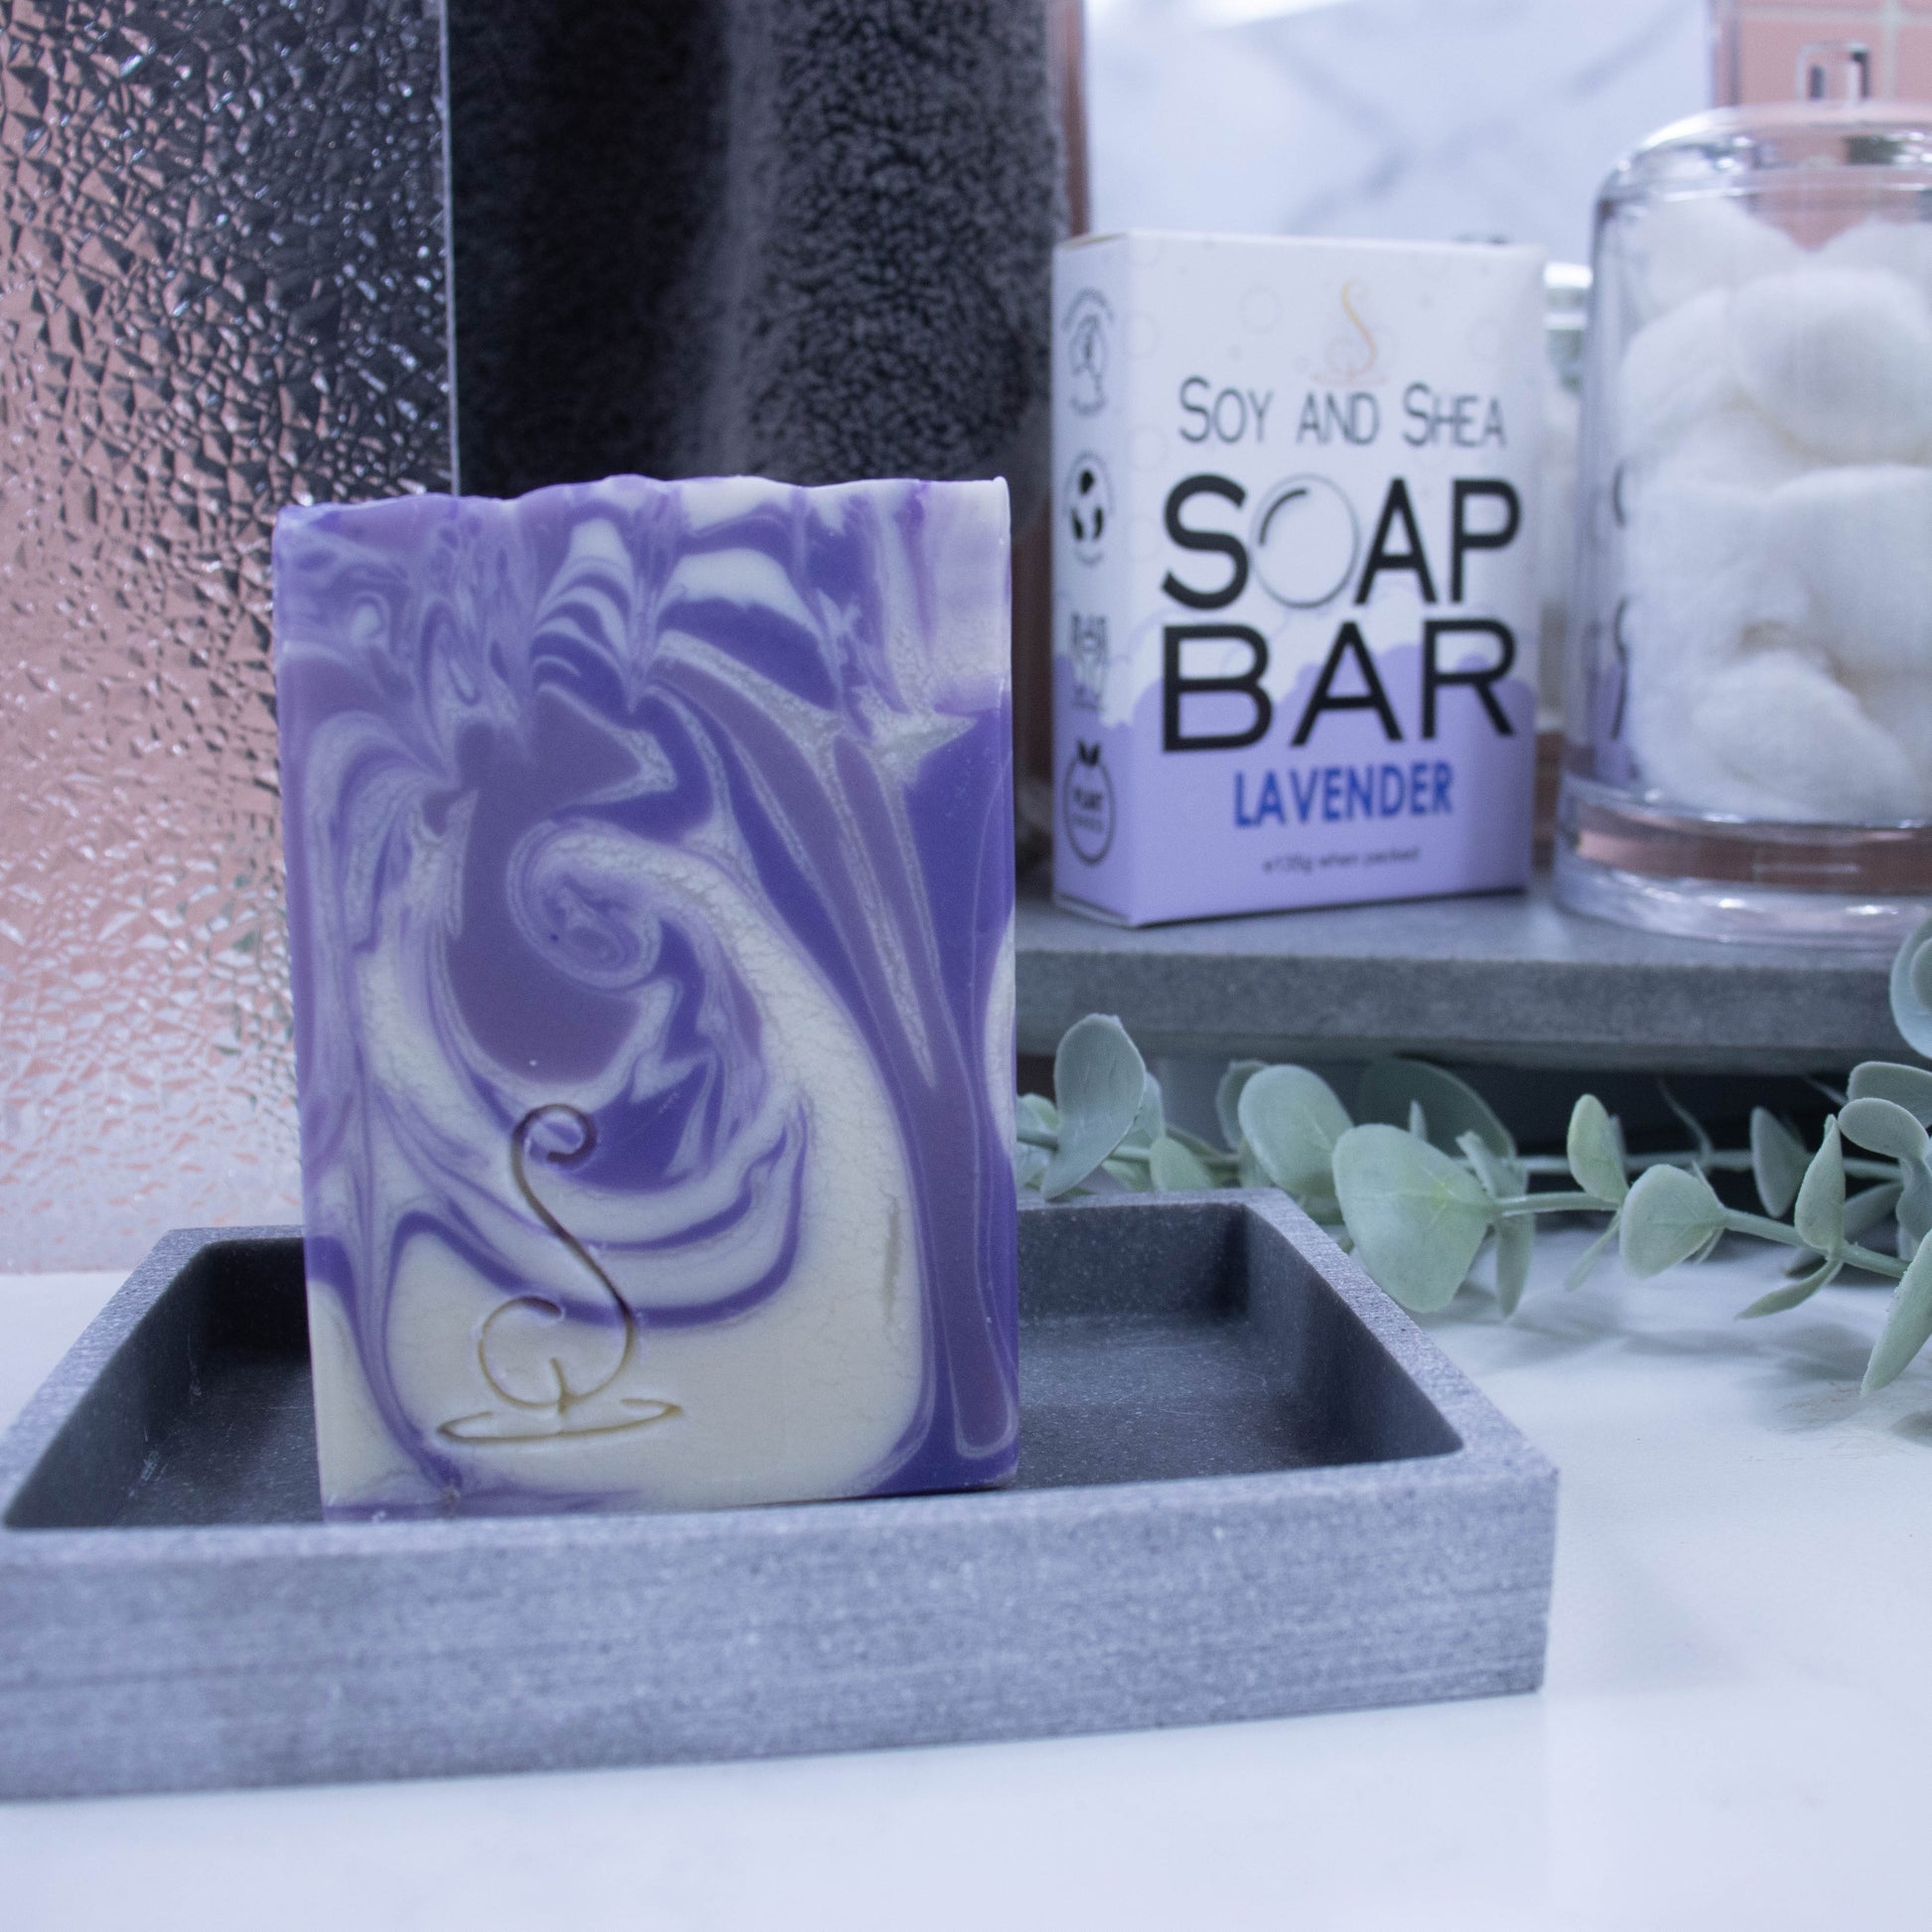 A tall rectangular bar of soap sits on a grey soap dish. The soap features swirls of colour in white, lavender and dark purple.  Behind the soap is a shower screen and towel along with a box the soap was presented in.  The box has a white top with pale purple bubble border.